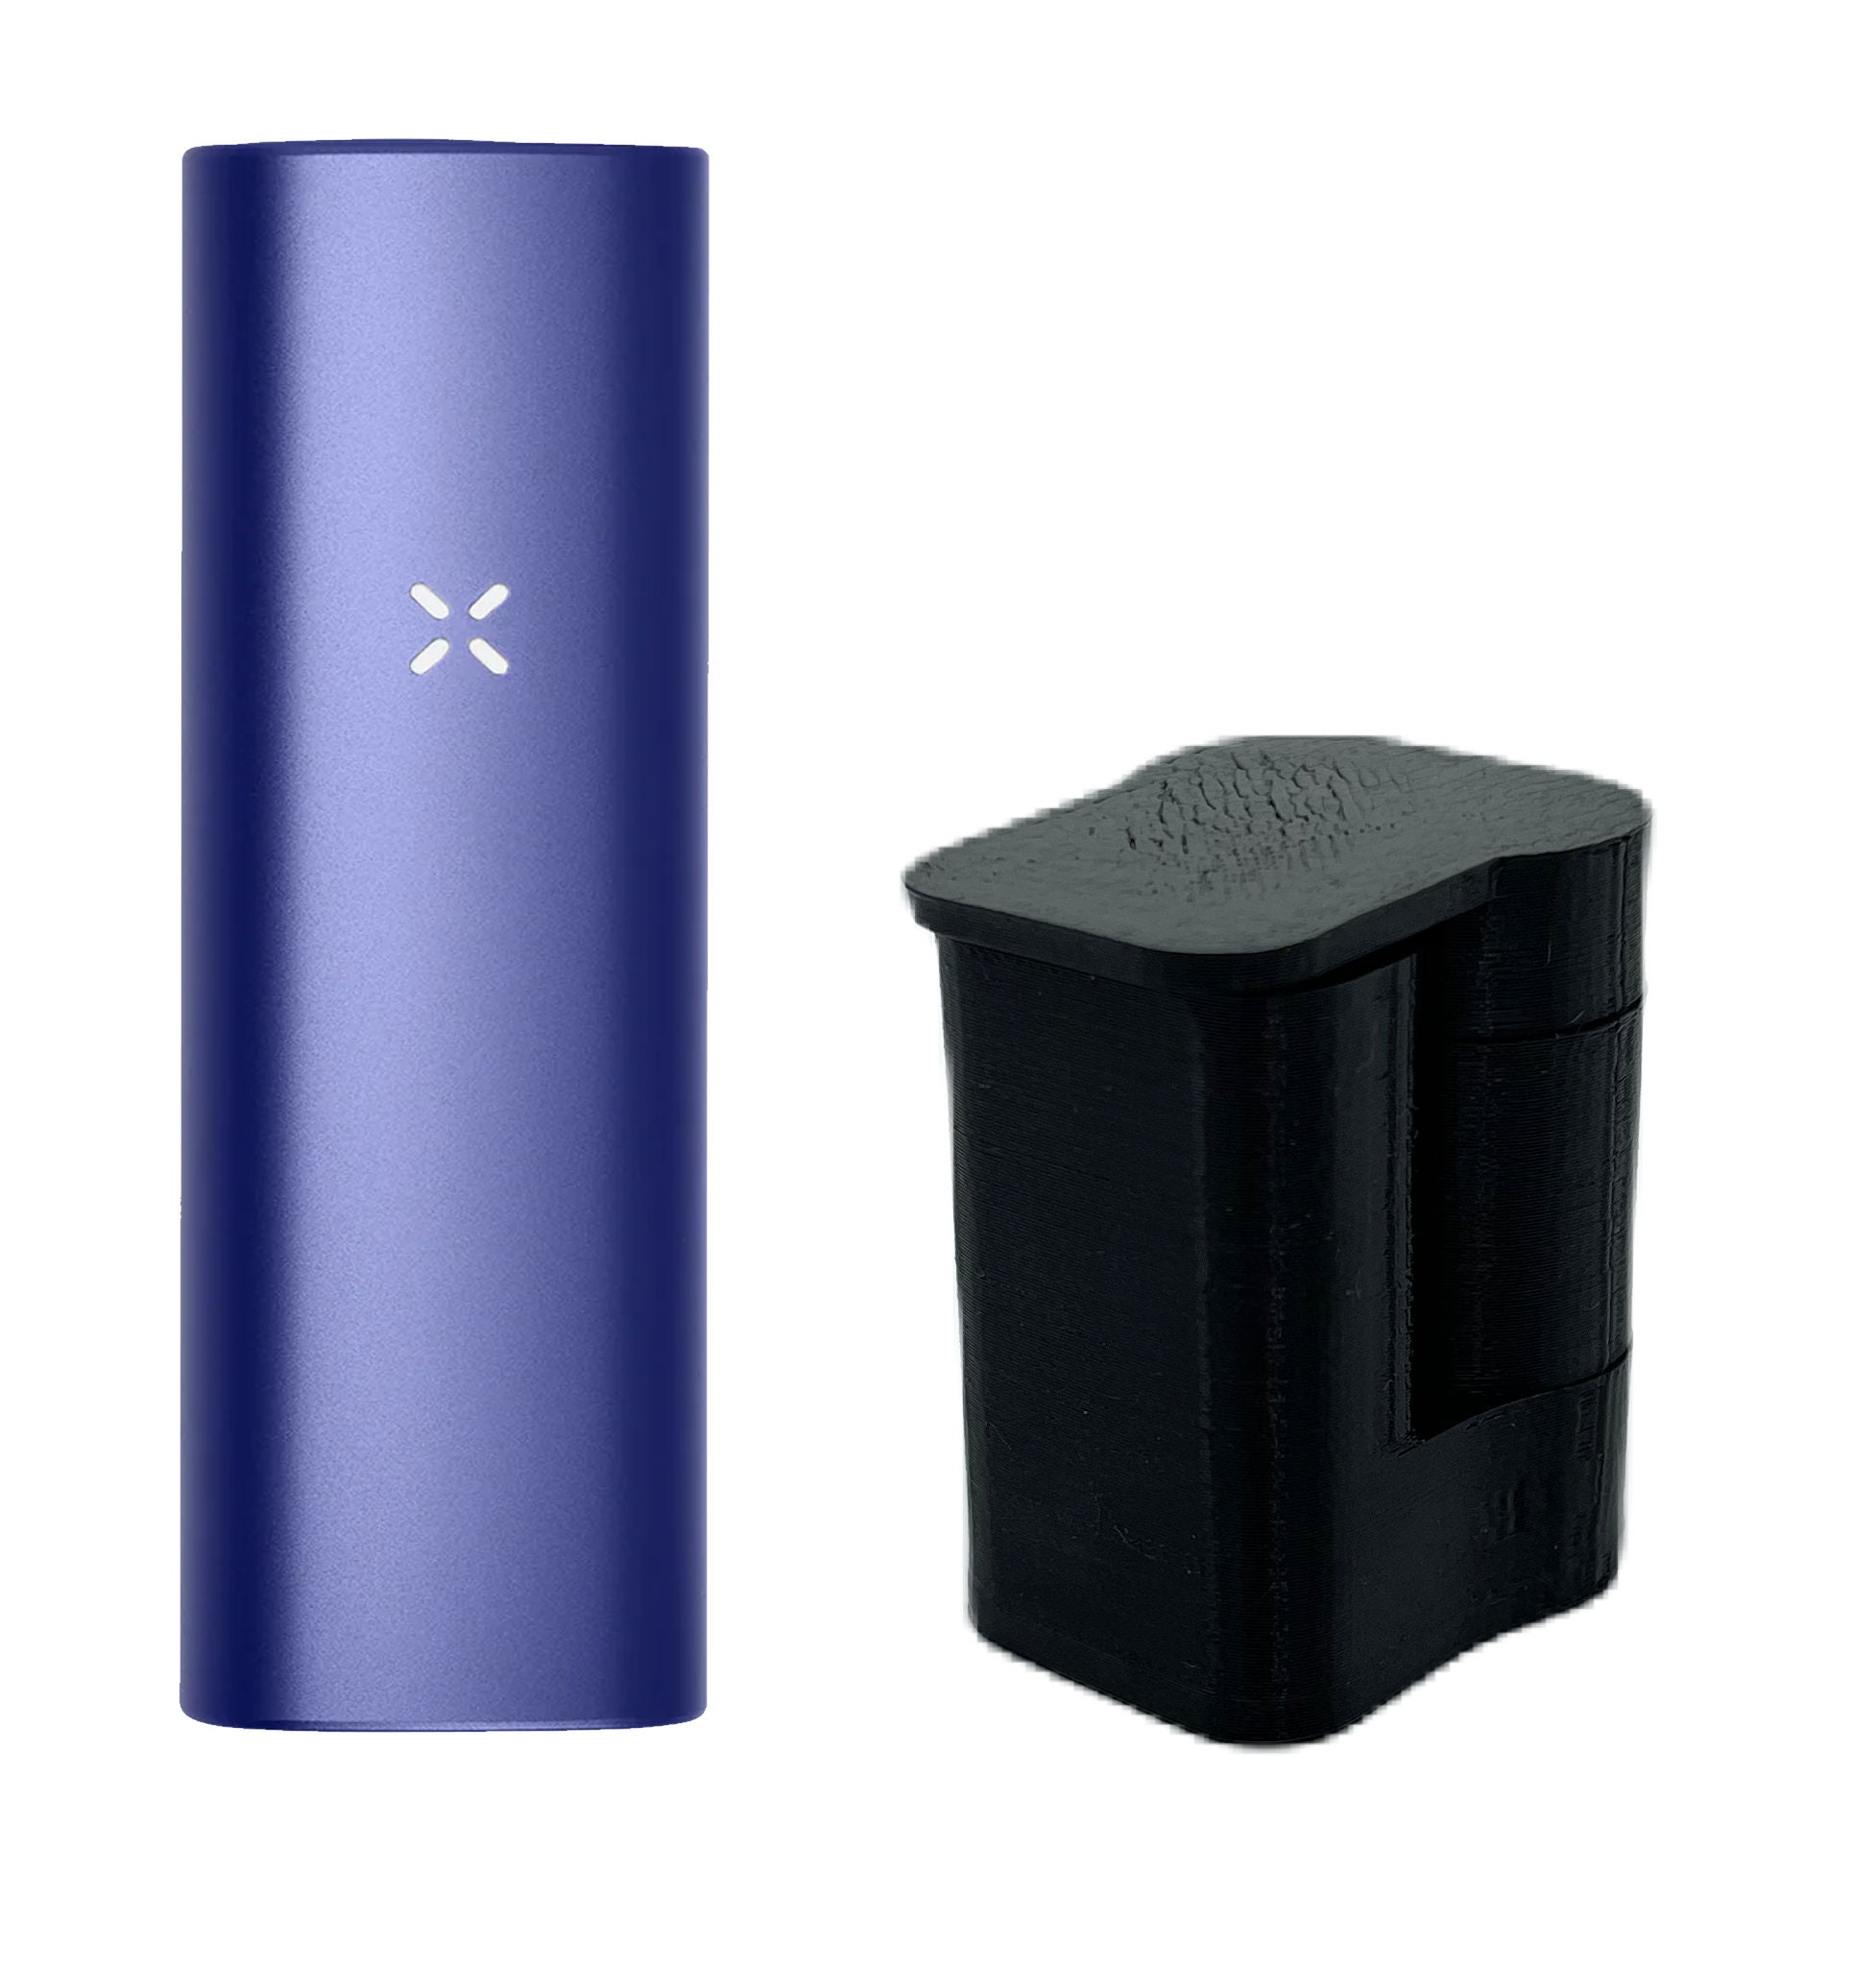 Pax3 third party accessories are essential! While PAX has a tool, these are  essential, their's looks great and functions well but just doesn't cover  all the bases, here I have the sandwich